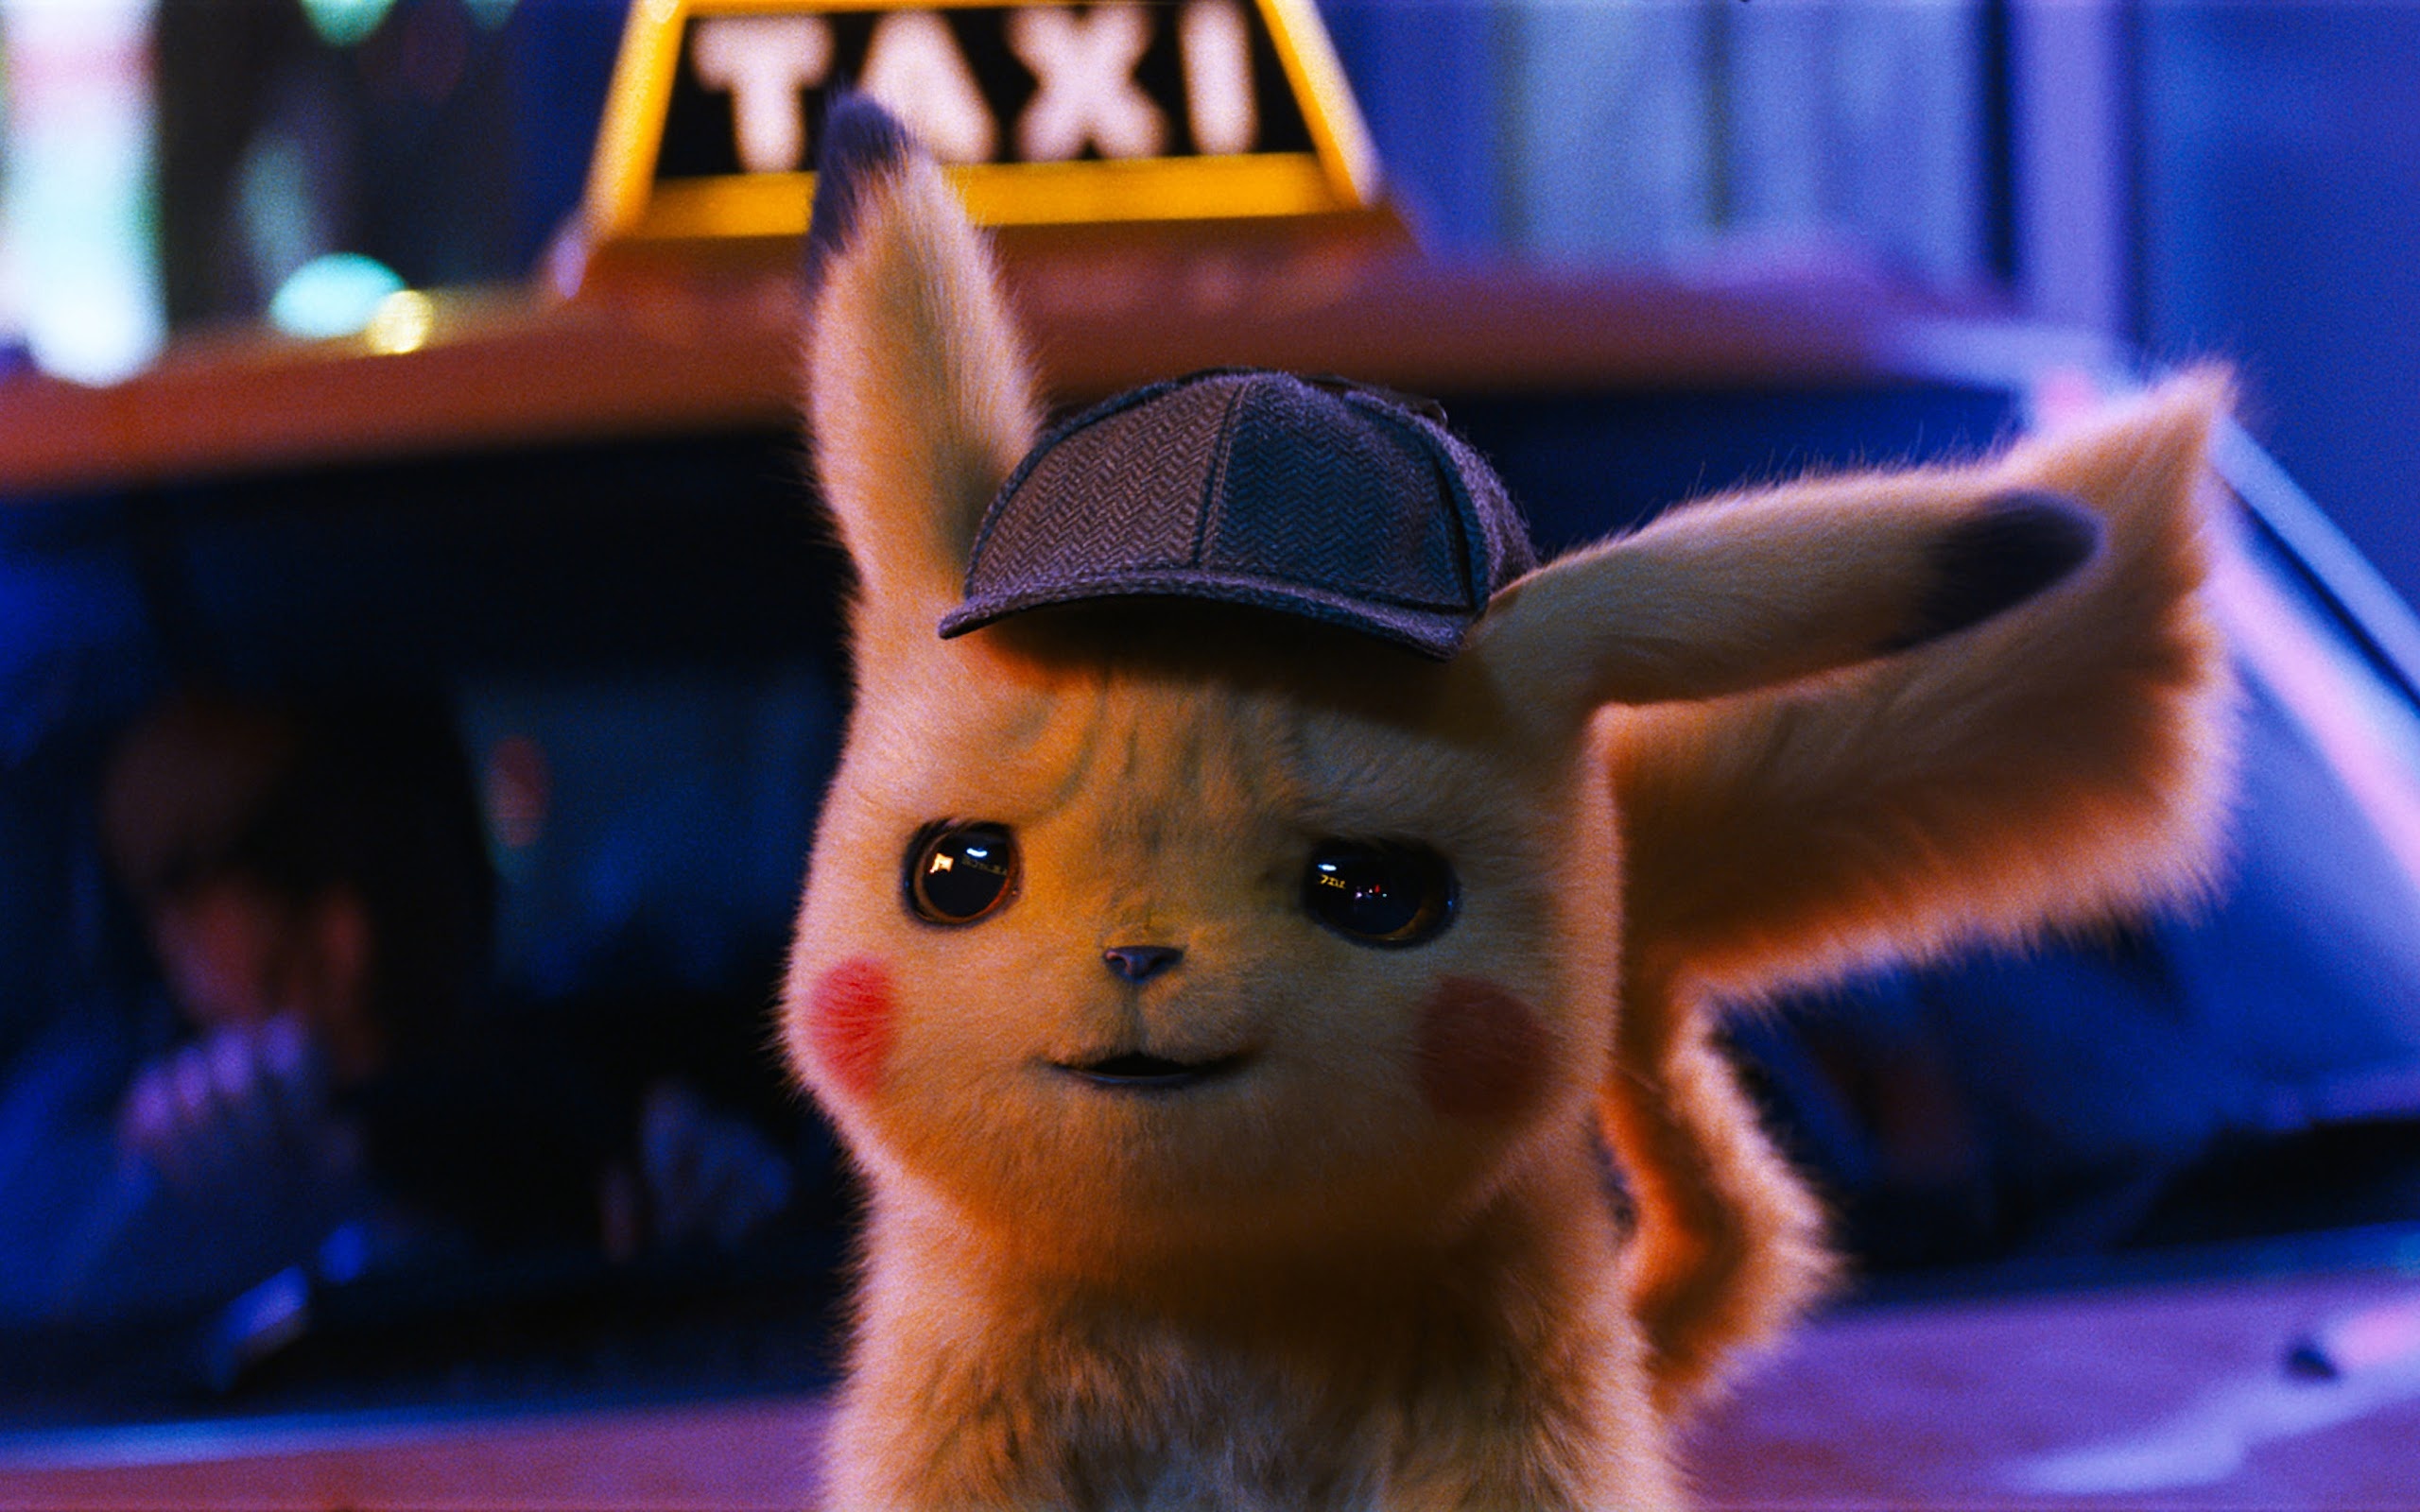 Pokemon Detective Pikachu: The film was released in Japan on May 3, 2019, Ryan Reynolds. 2560x1600 HD Background.